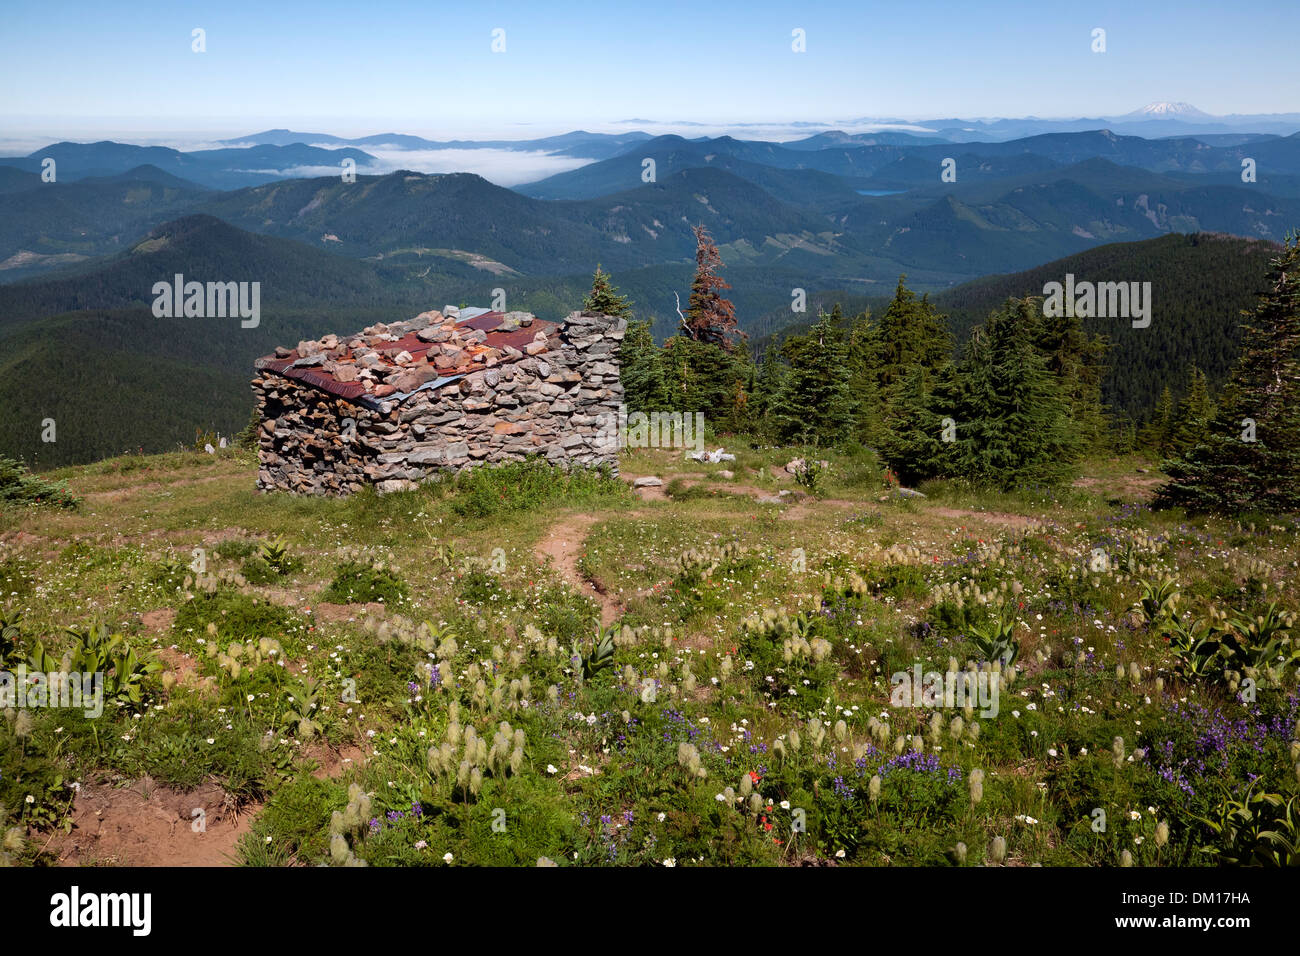 OREGON - McNeil Point Stone Shelter located in a wildflower covered meadow with Mount St. Helens in the distance. Stock Photo